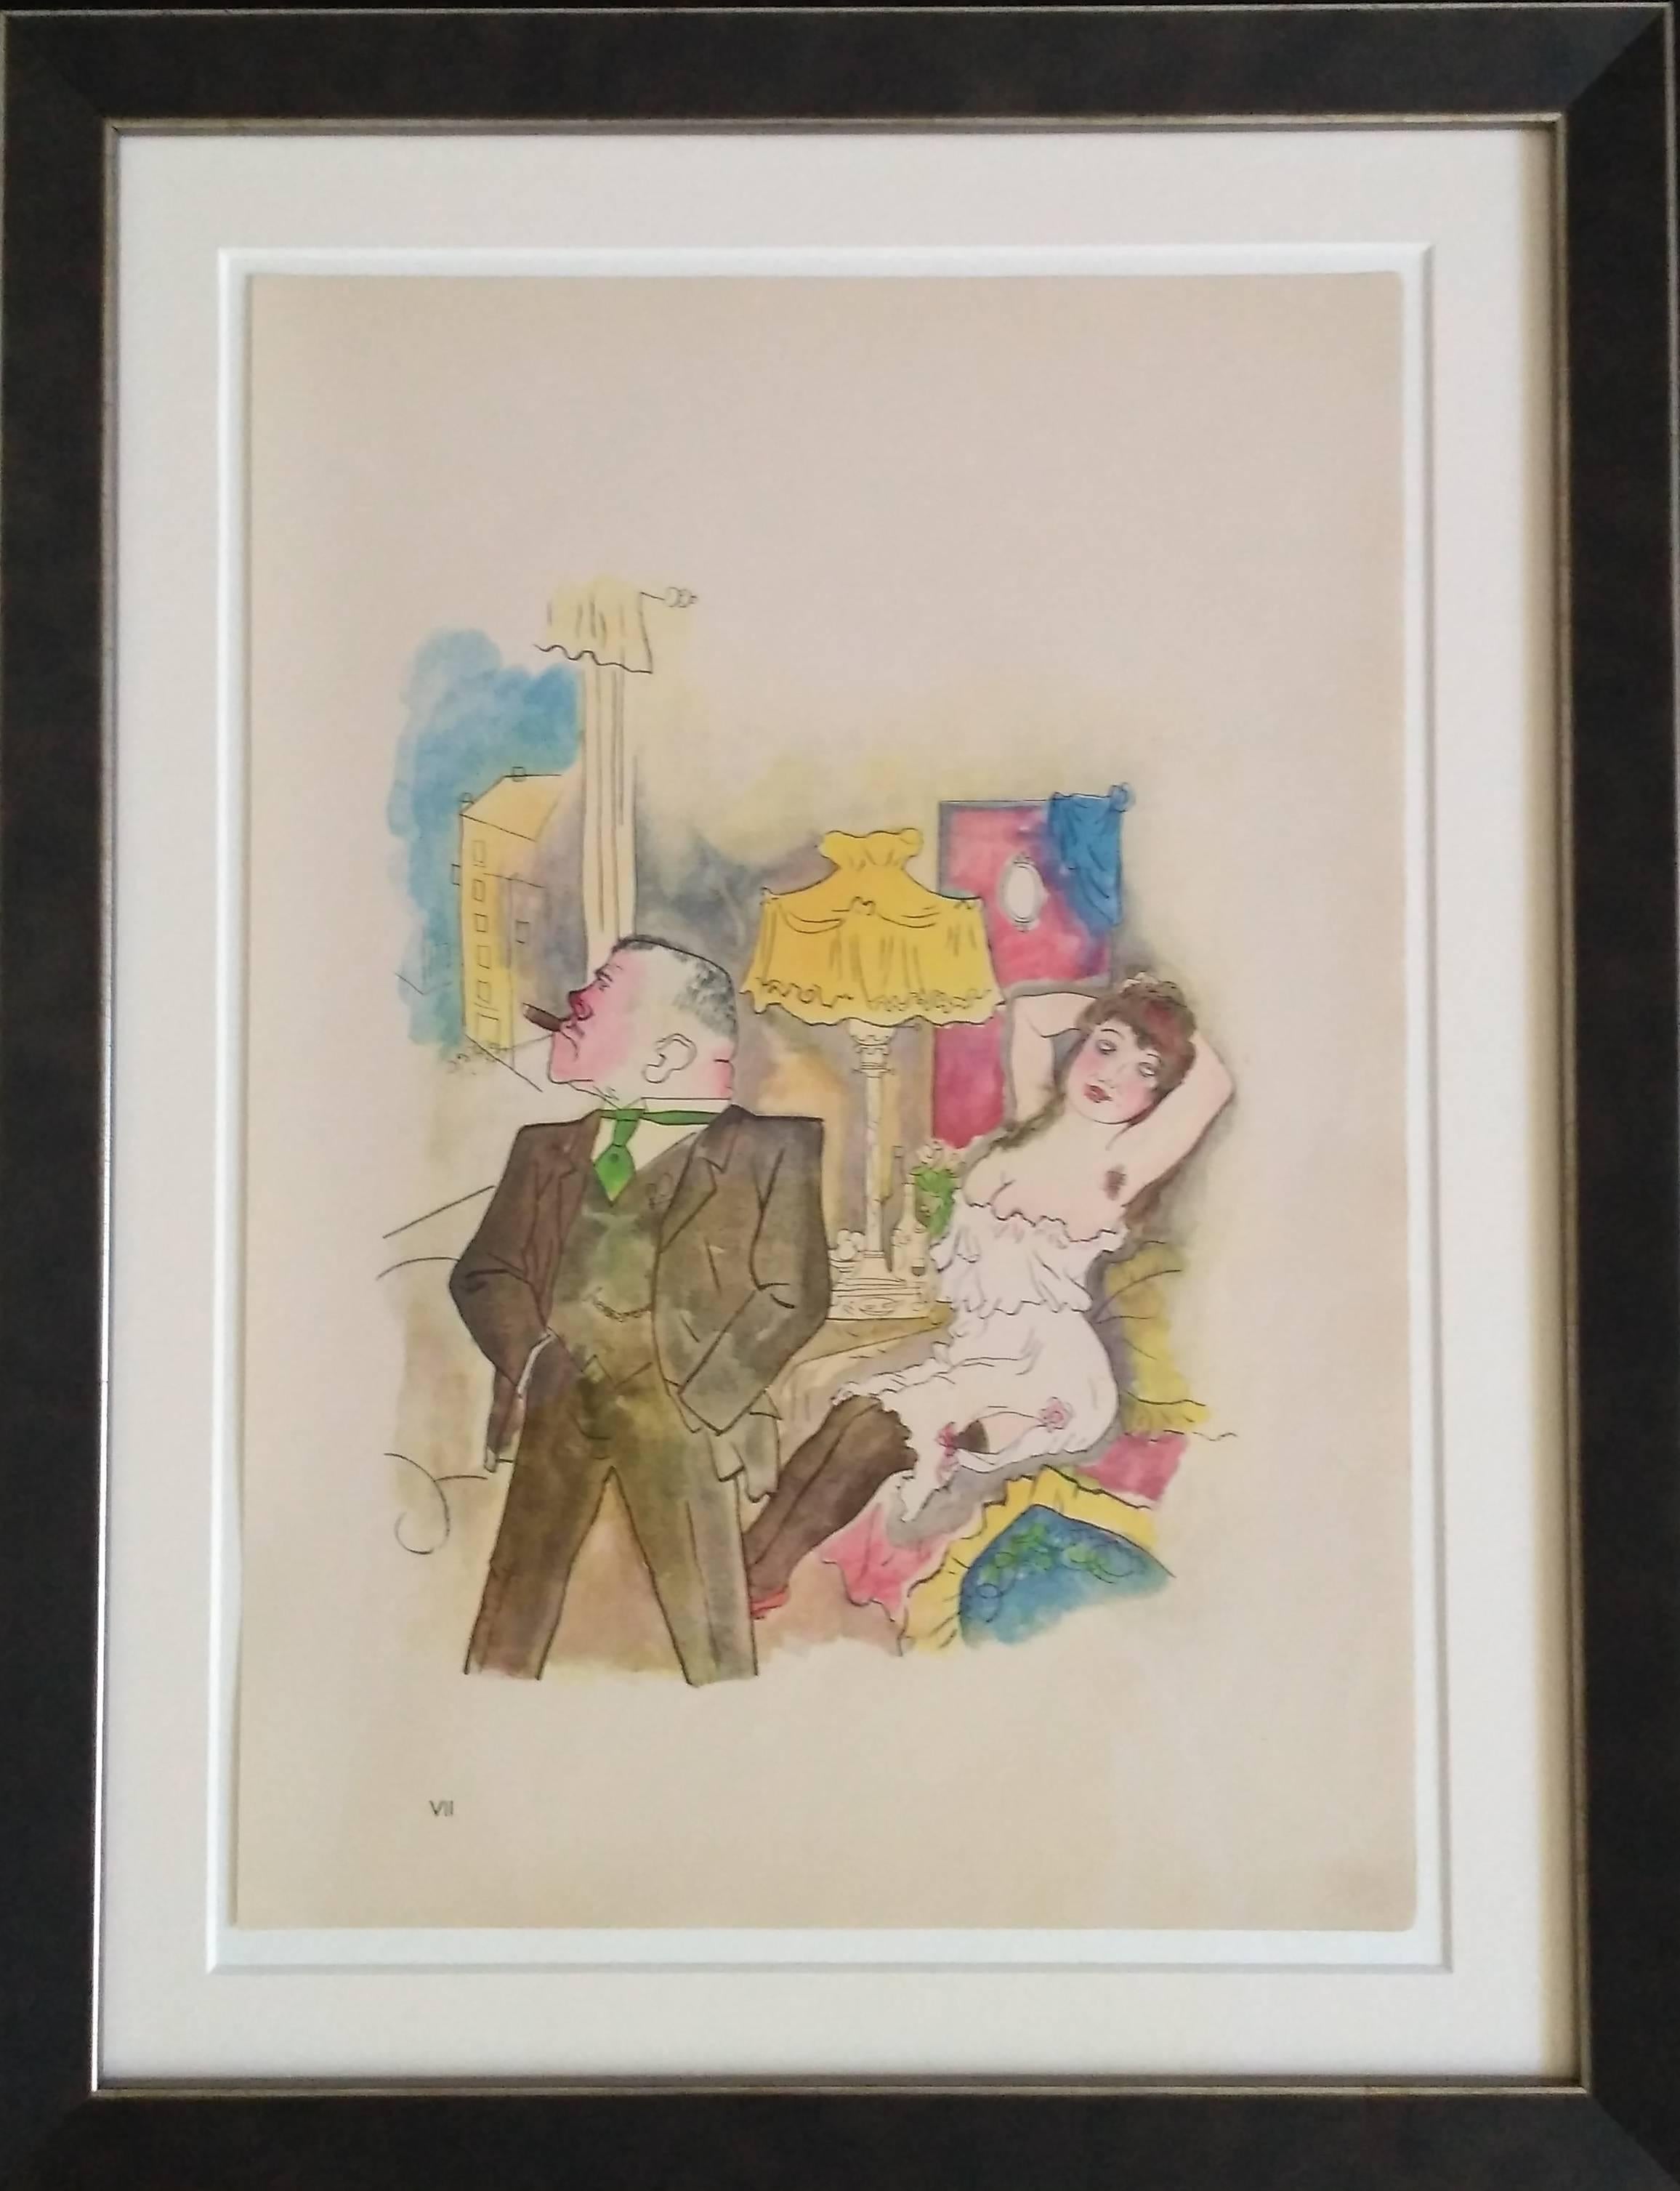 George Grosz Lithograph "Kraft und Anmut" ( Strength and Grace ), 1922